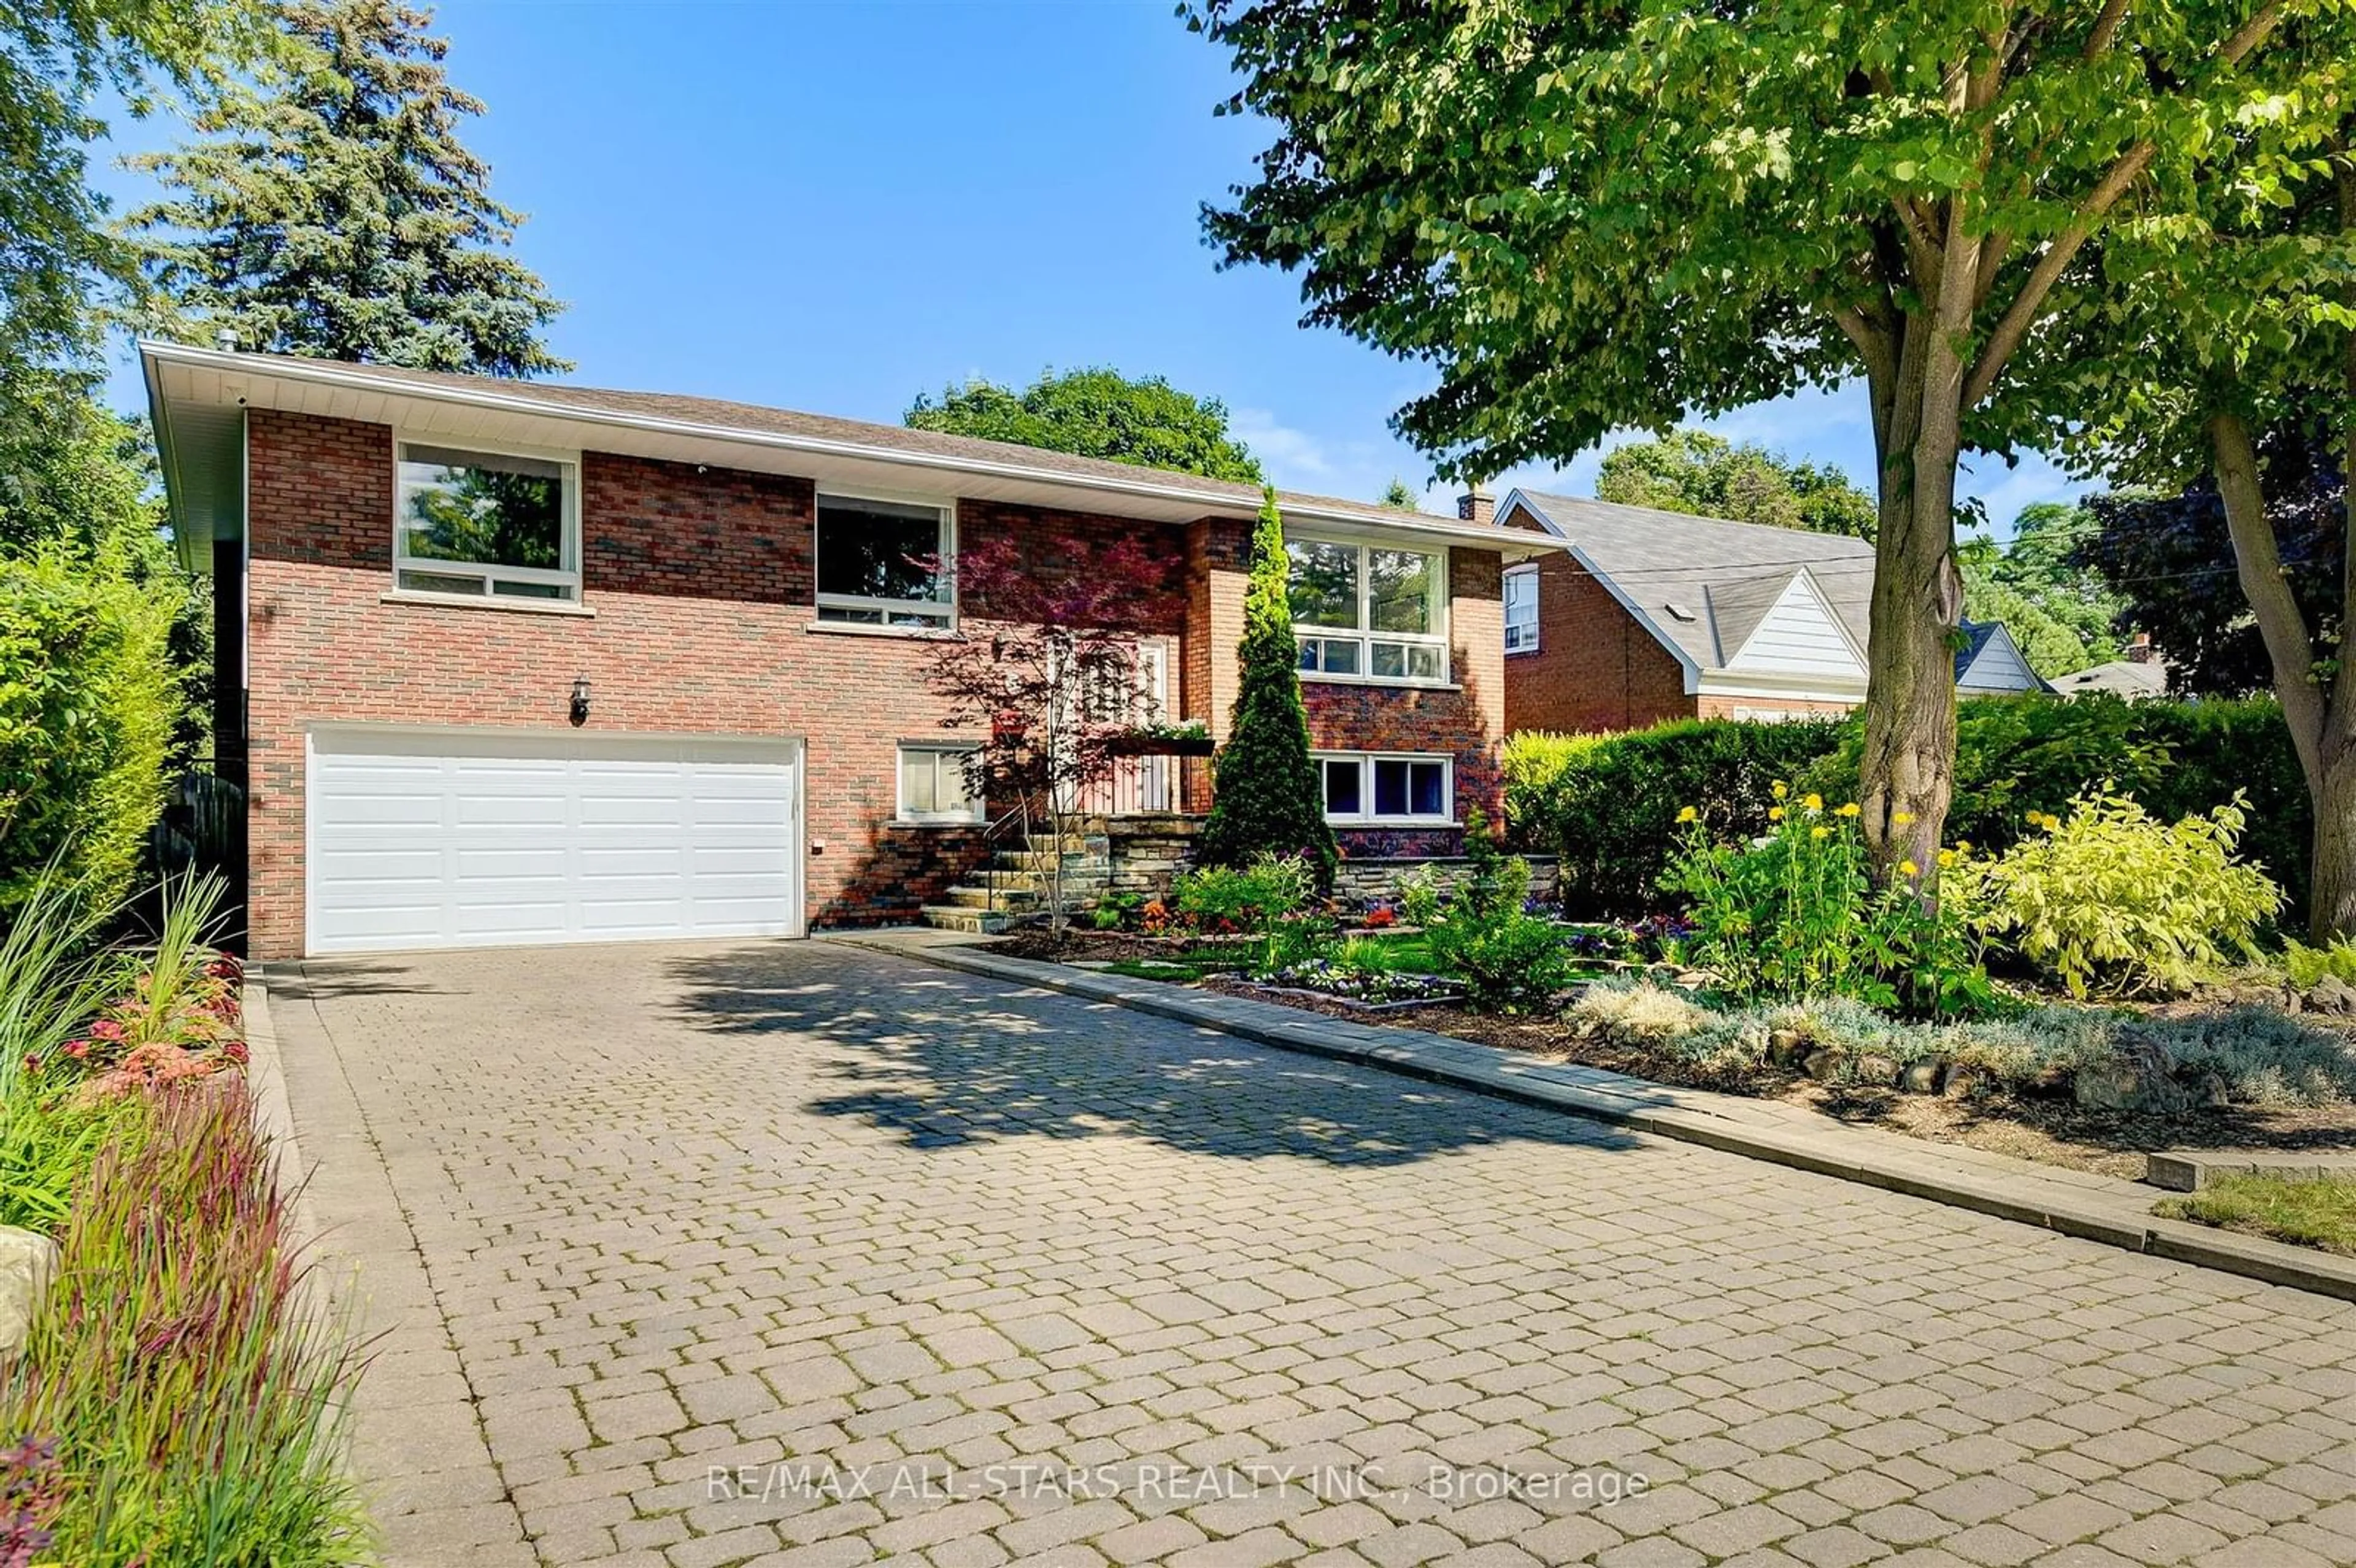 Home with brick exterior material for 29 Scarborough Heights Blvd, Toronto Ontario M1M 2V3